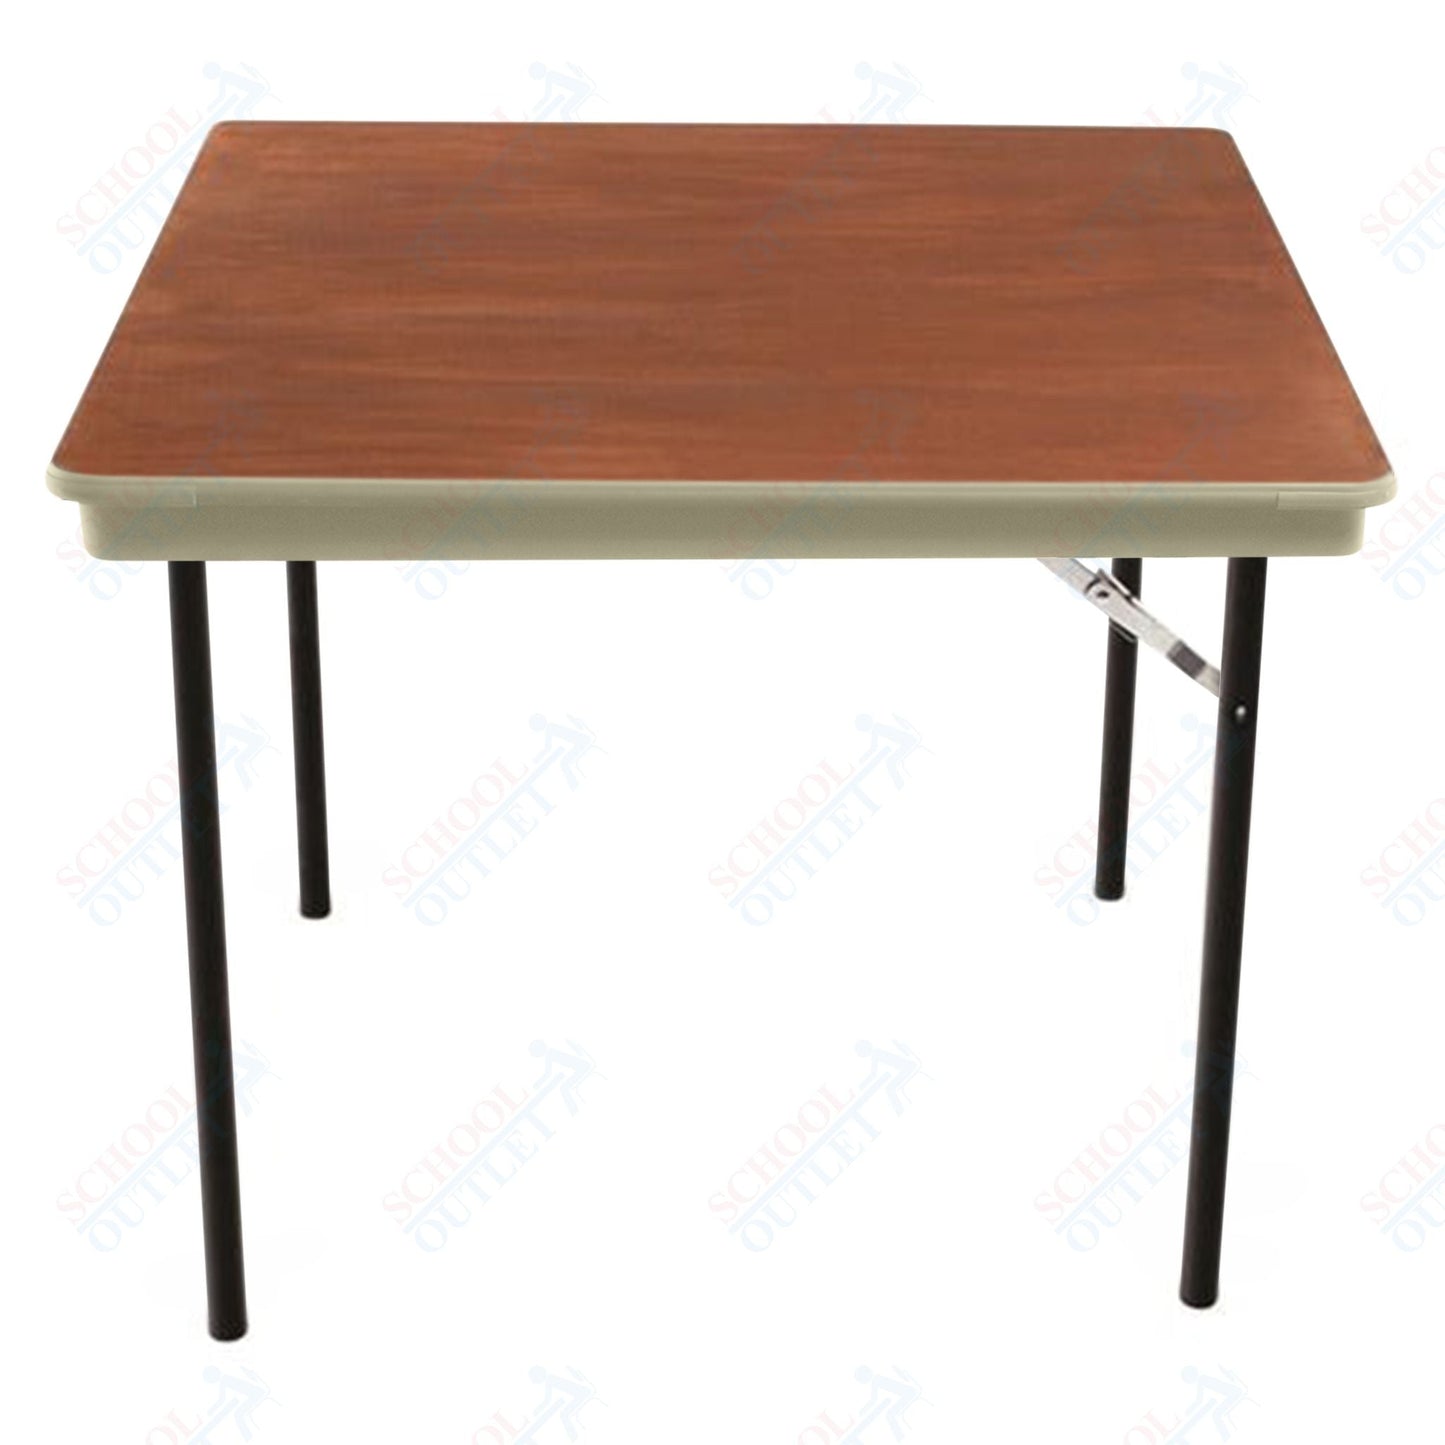 AmTab Folding Table - Plywood Stained and Sealed - Vinyl T - Molding Edge - Square - 36"W x 36"L x 29"H (AmTab AMT - SQ36PM) - SchoolOutlet